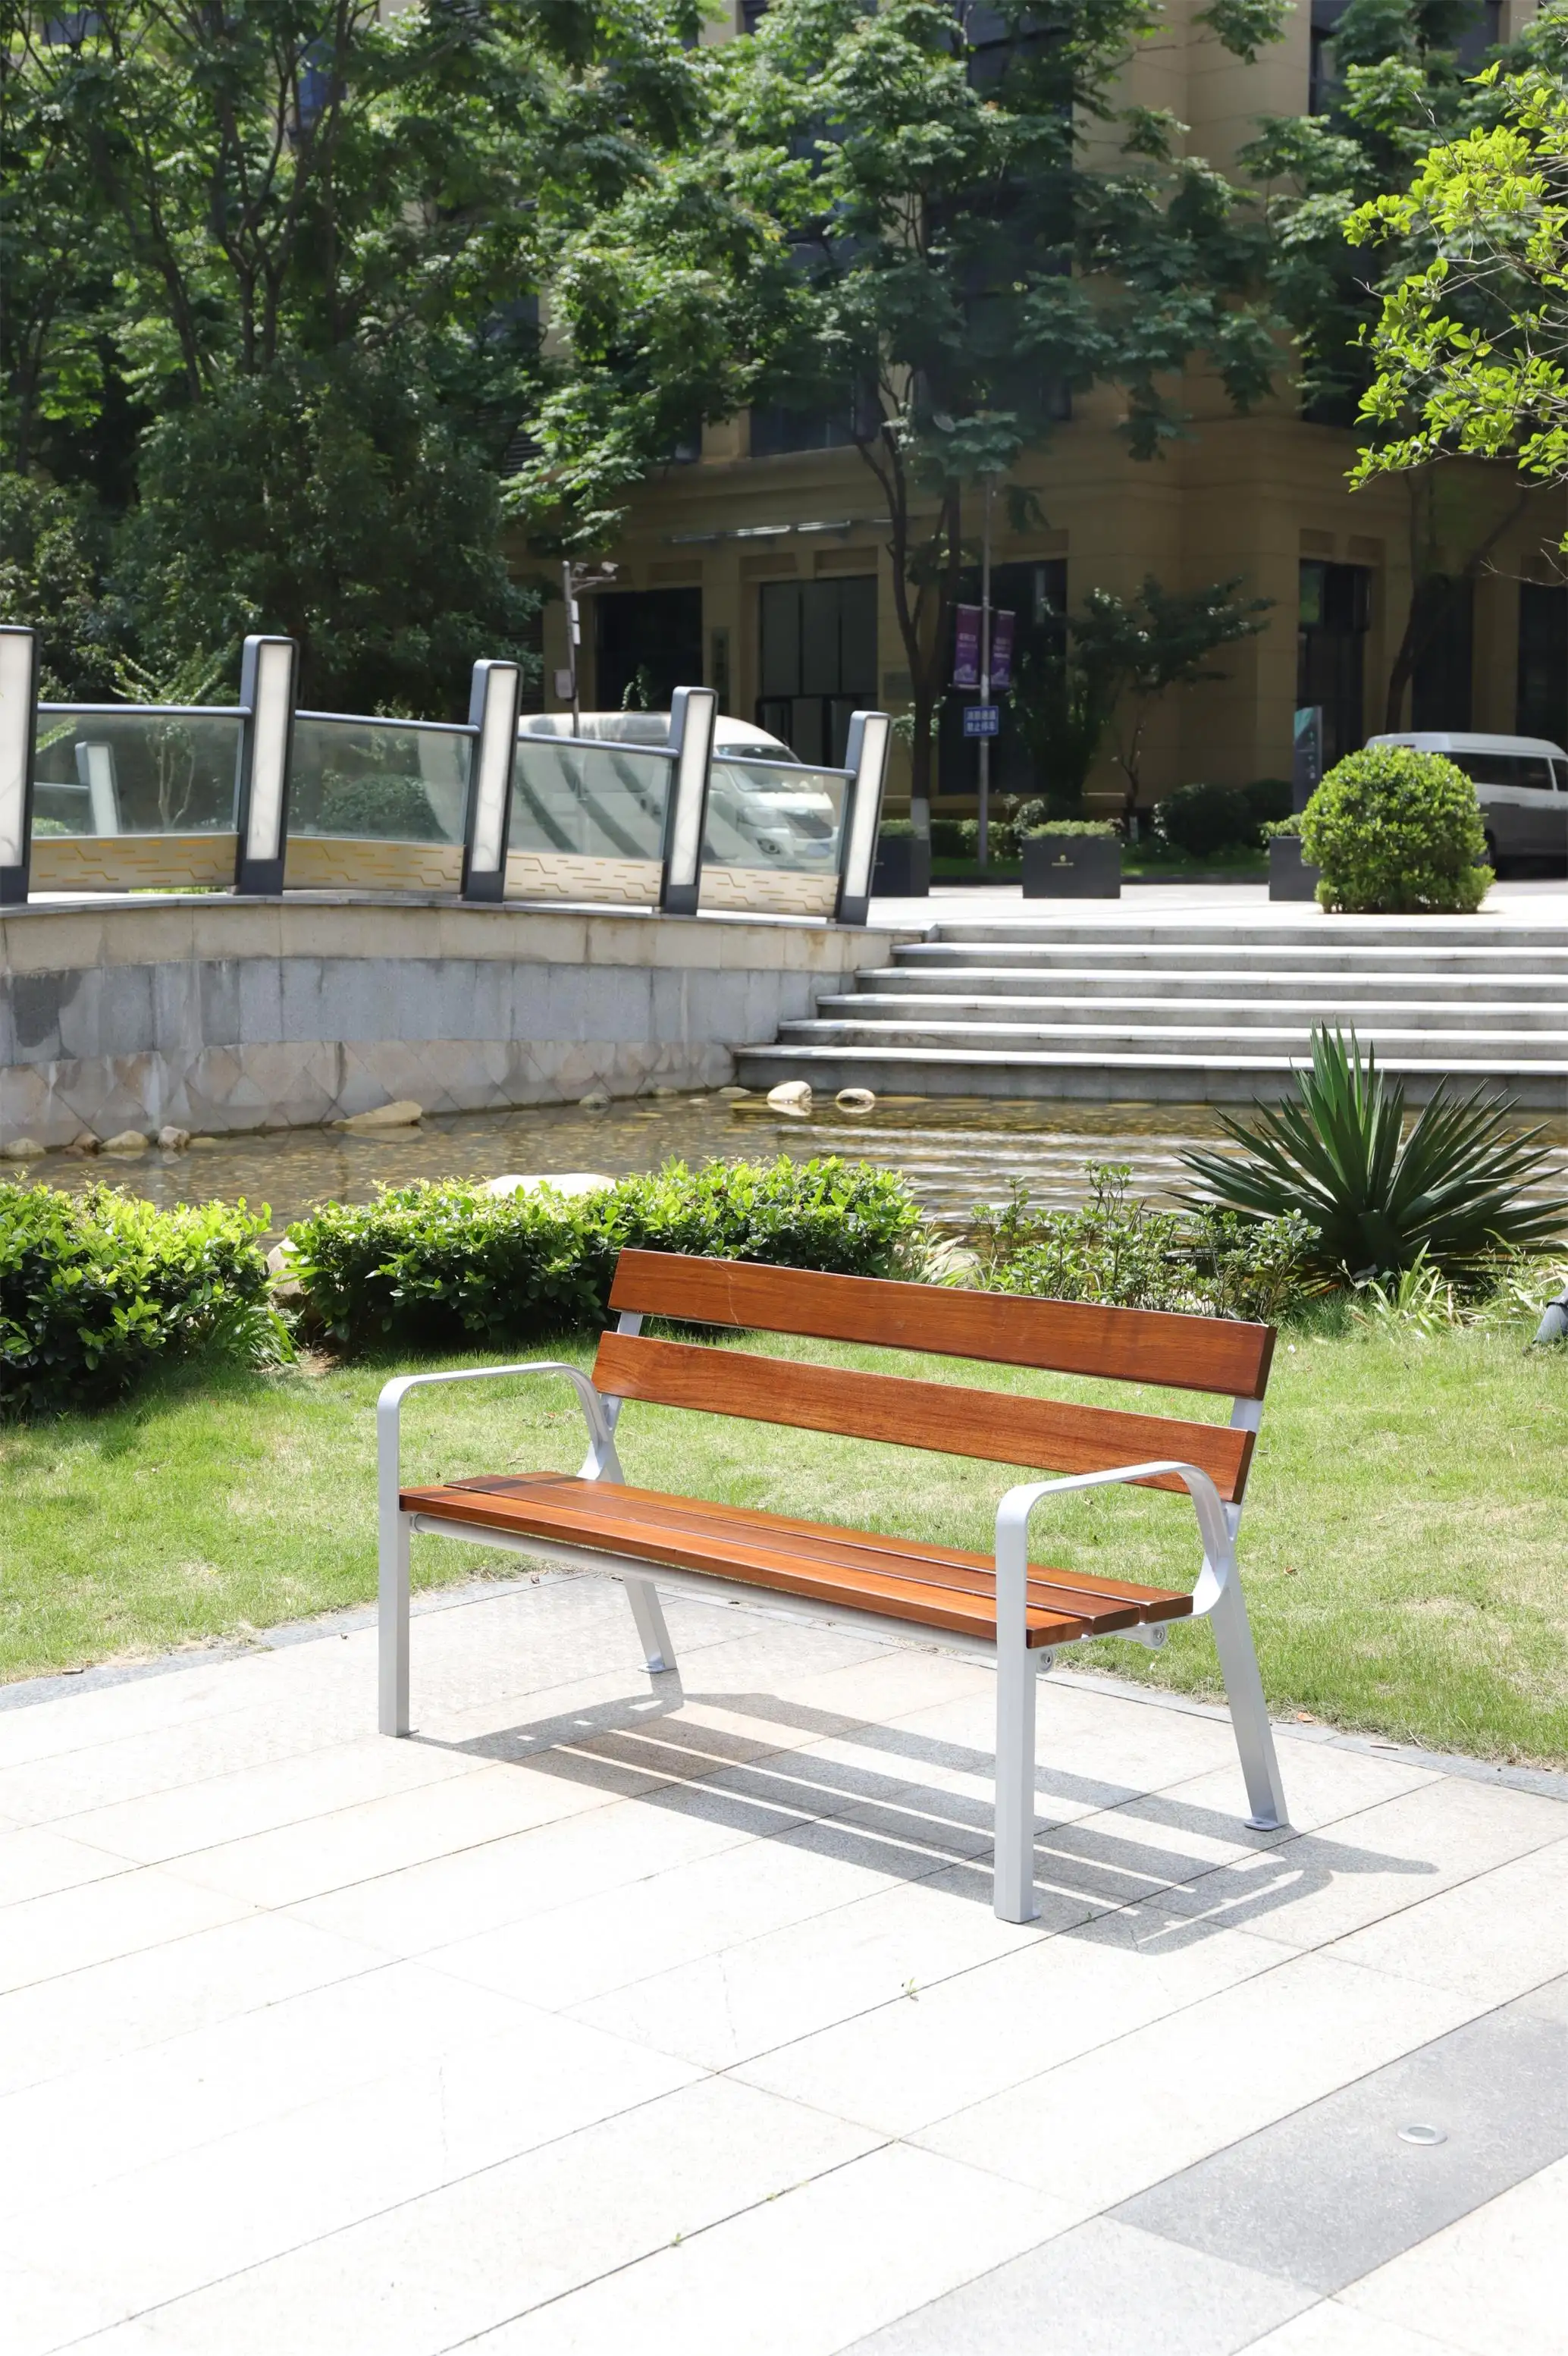 New Product Design Solid Wood Memorial Outdoor Bench With High Quality Aluminum Armrests For Town Park